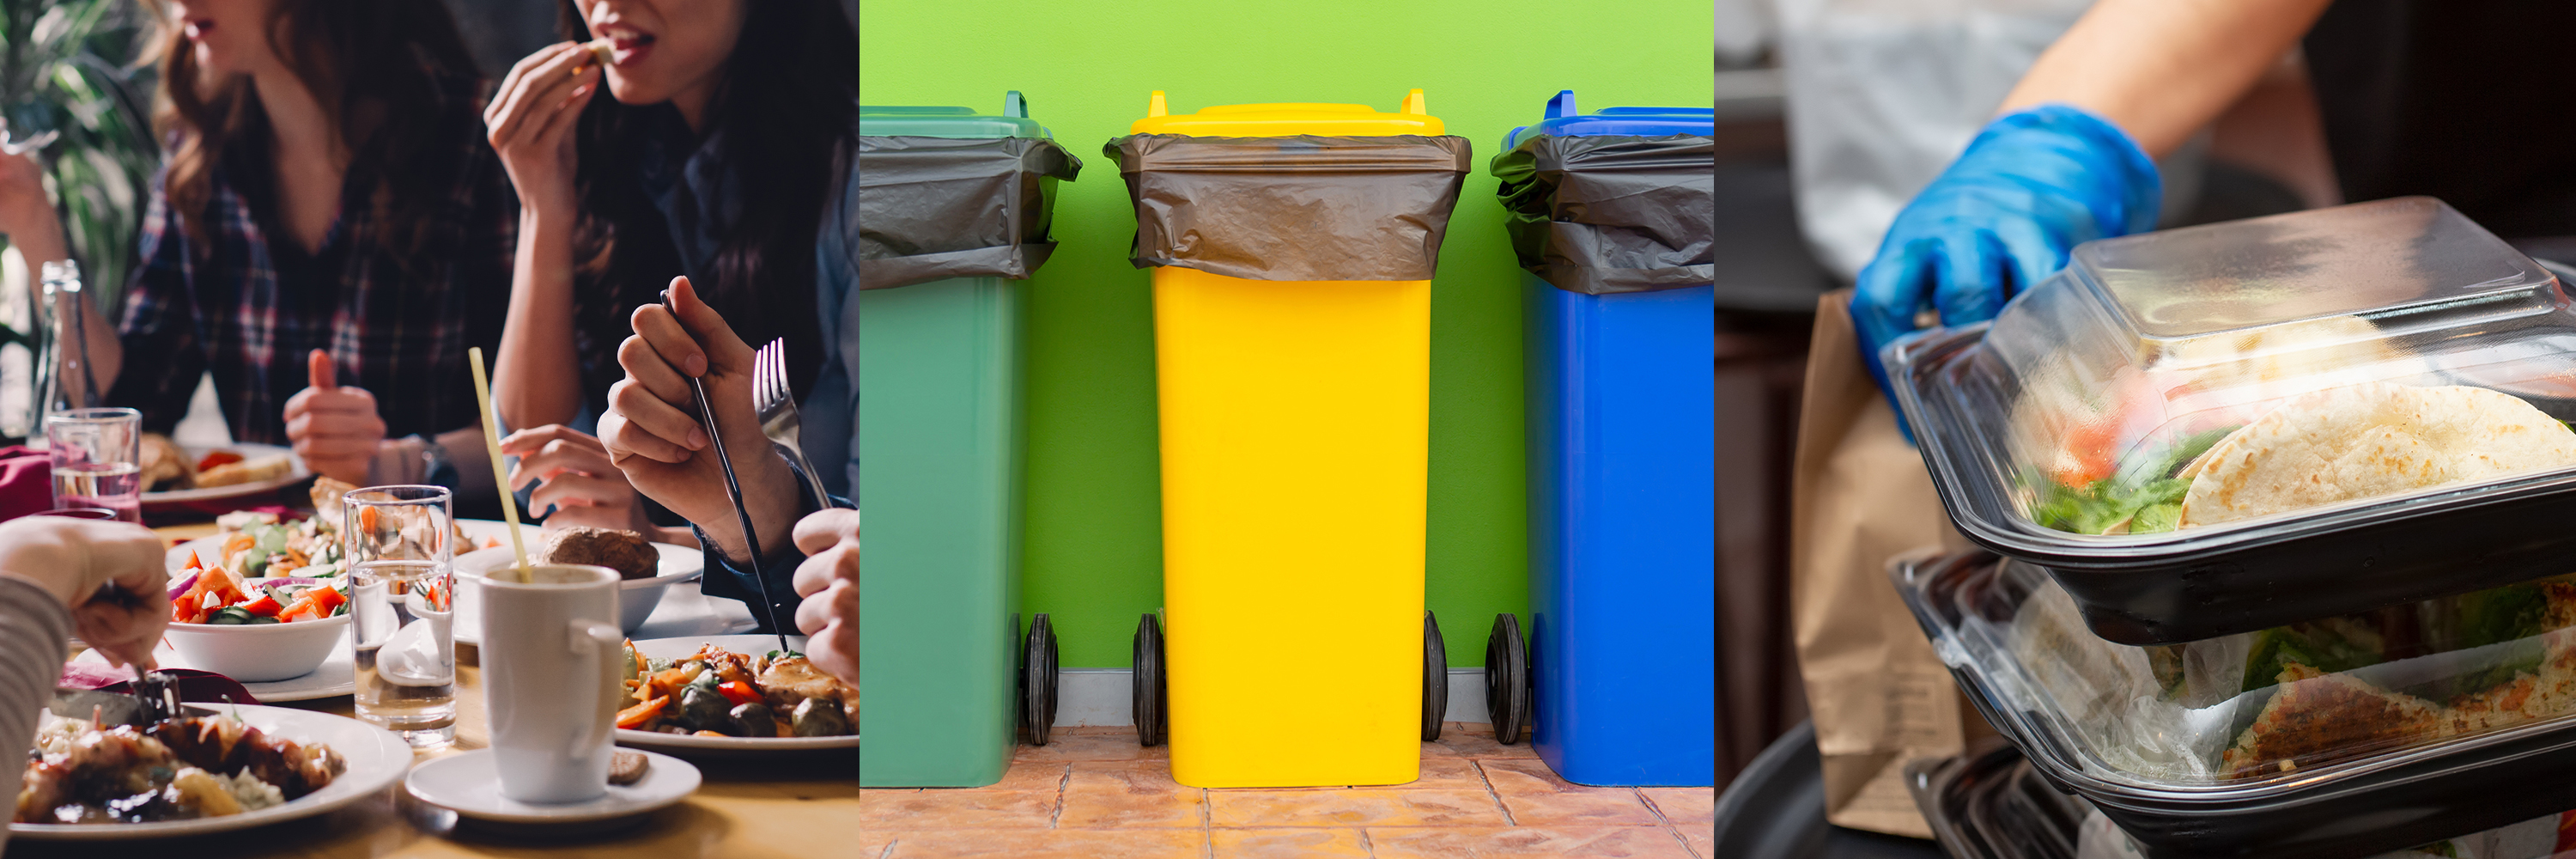 GUEST BLOG: Contaminated Food Scraps Bins? Ask These Three Questions to Find Out Why